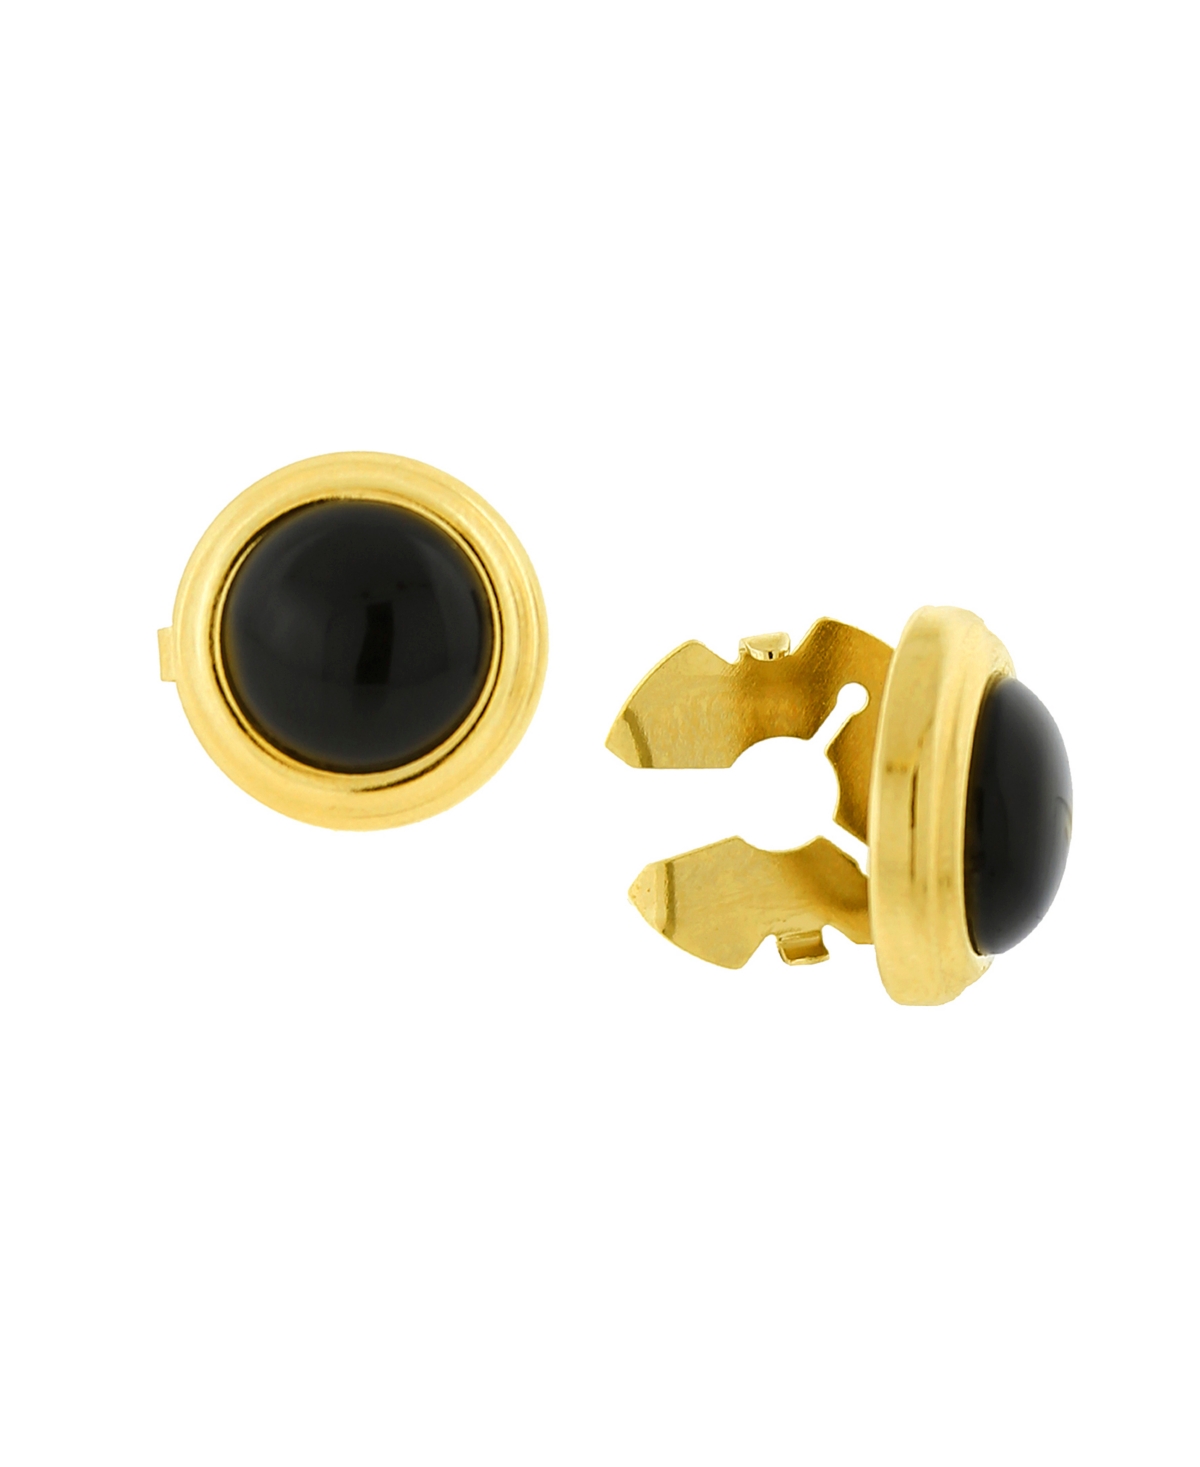 Jewelry 14K Gold Plated Round Button Covers - Black